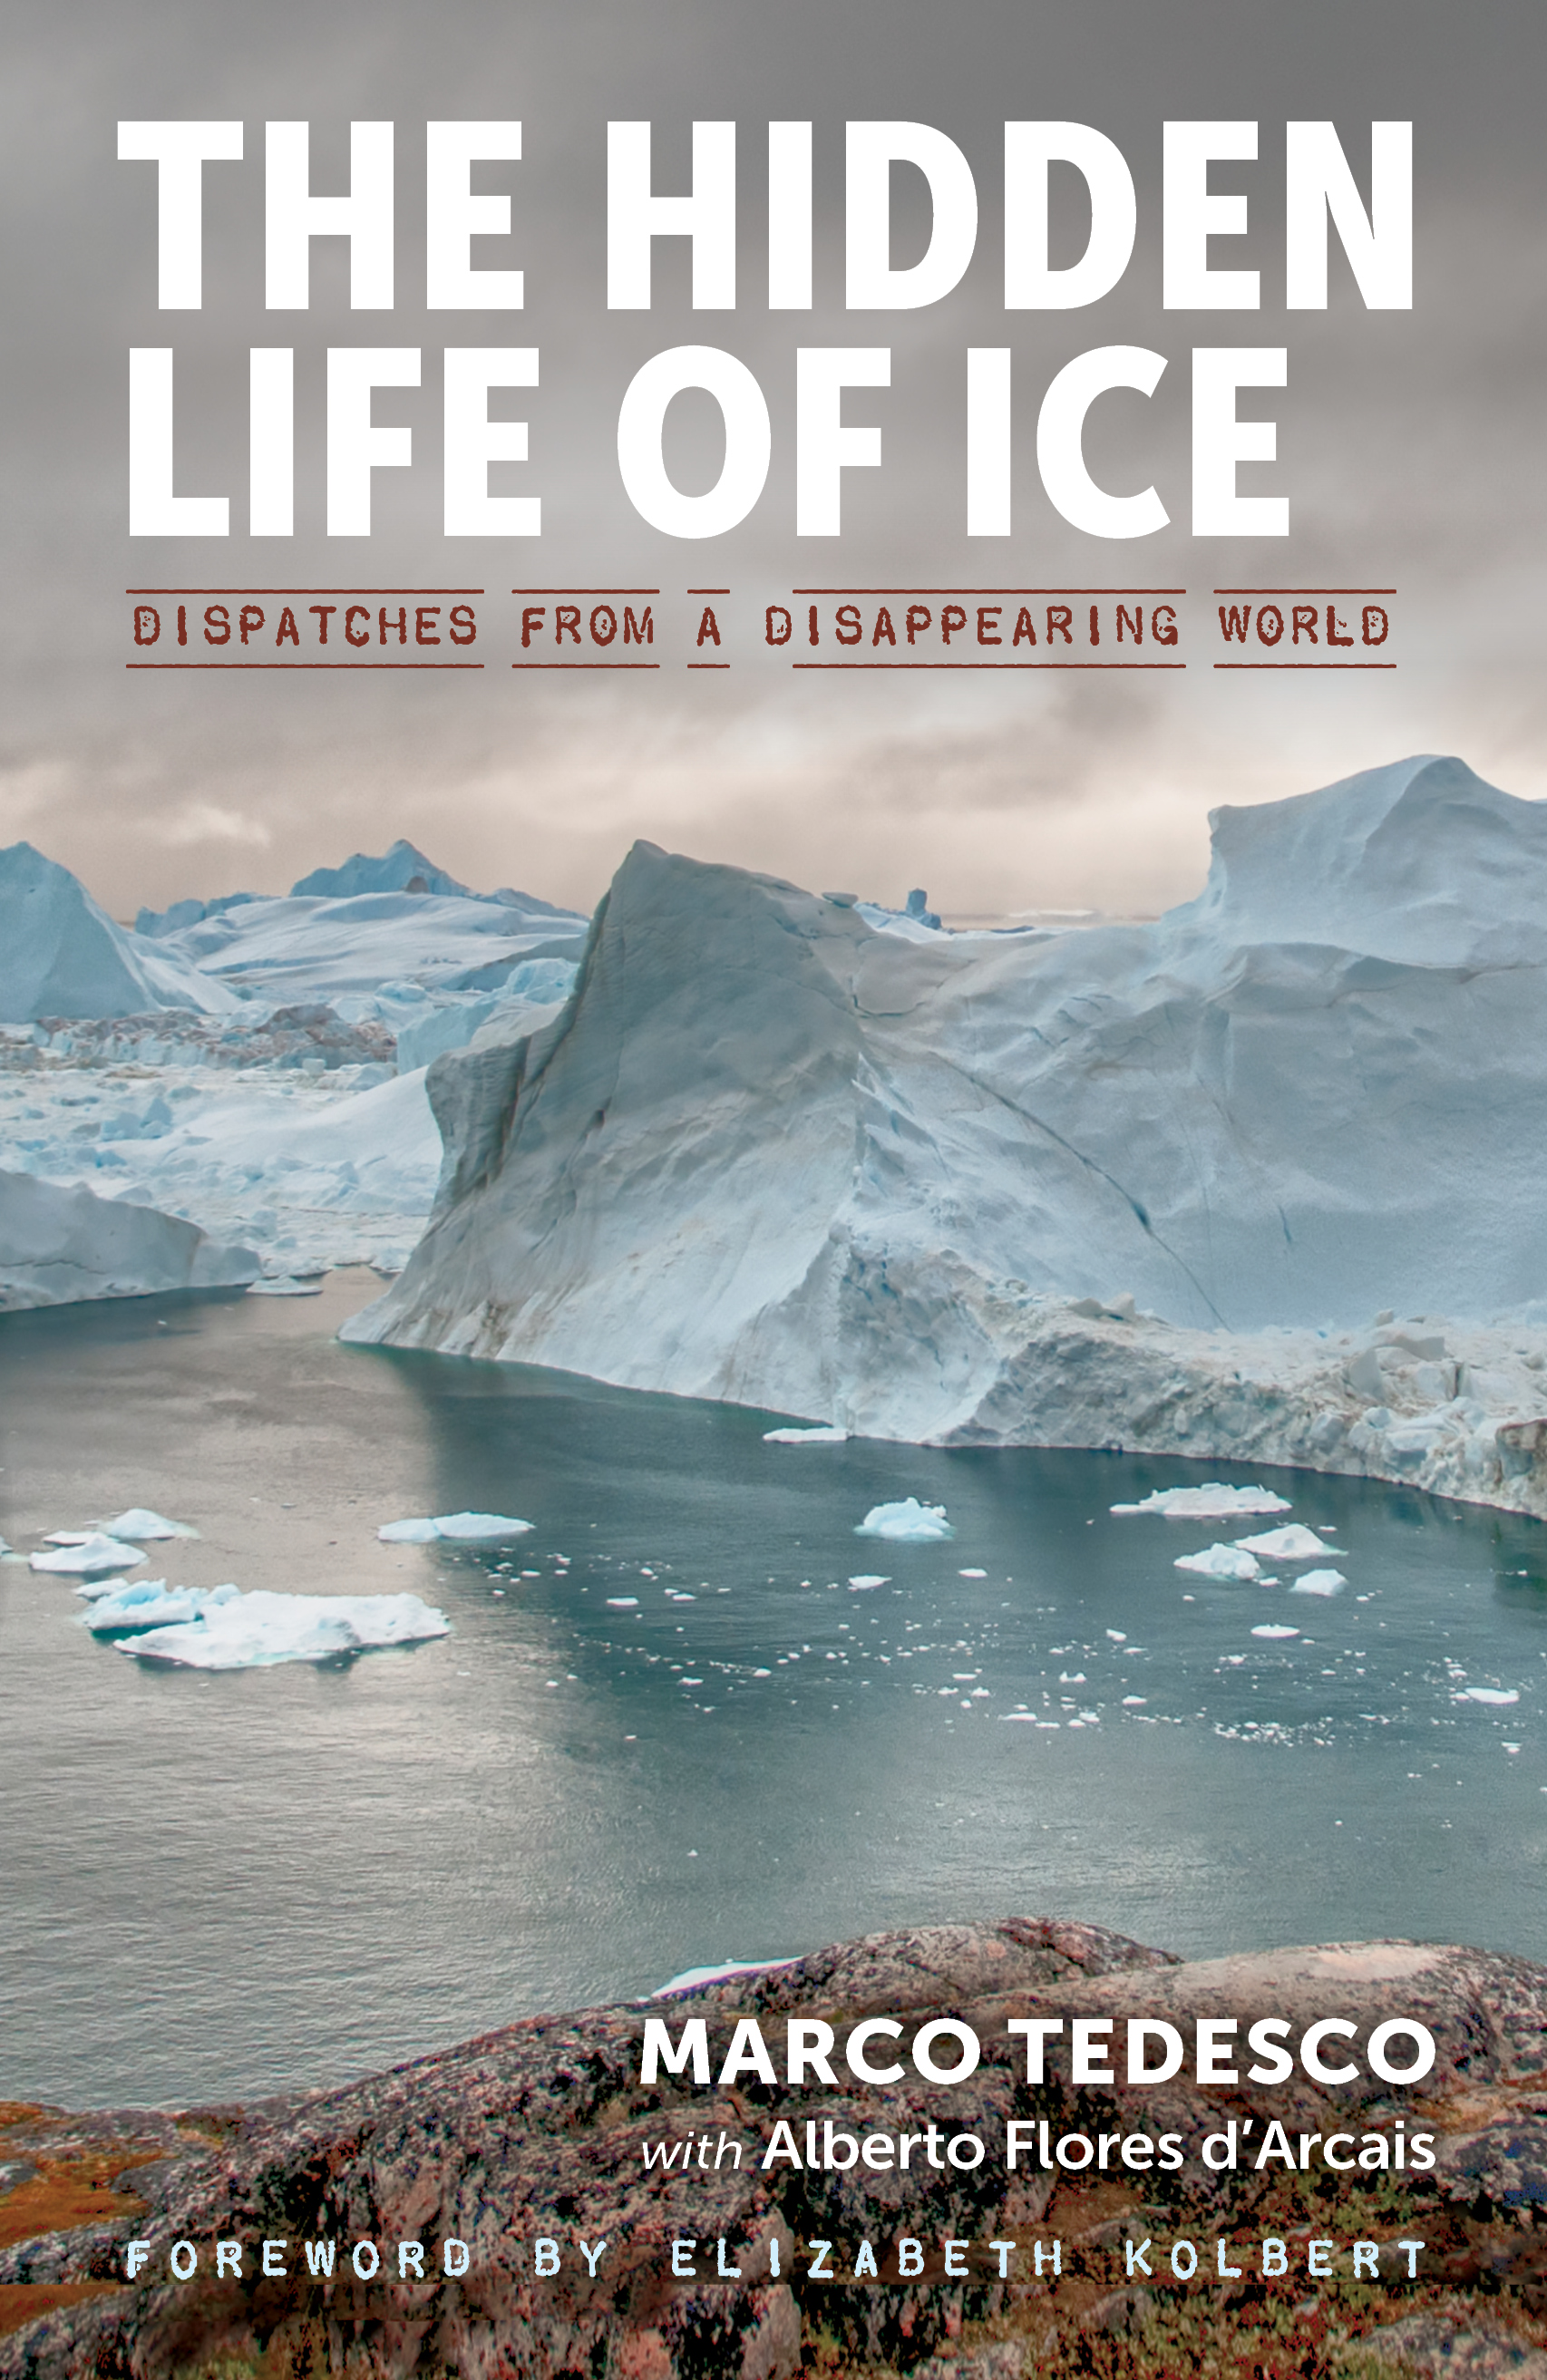 The hidden life of ice dispatches from a disappearing world cover image